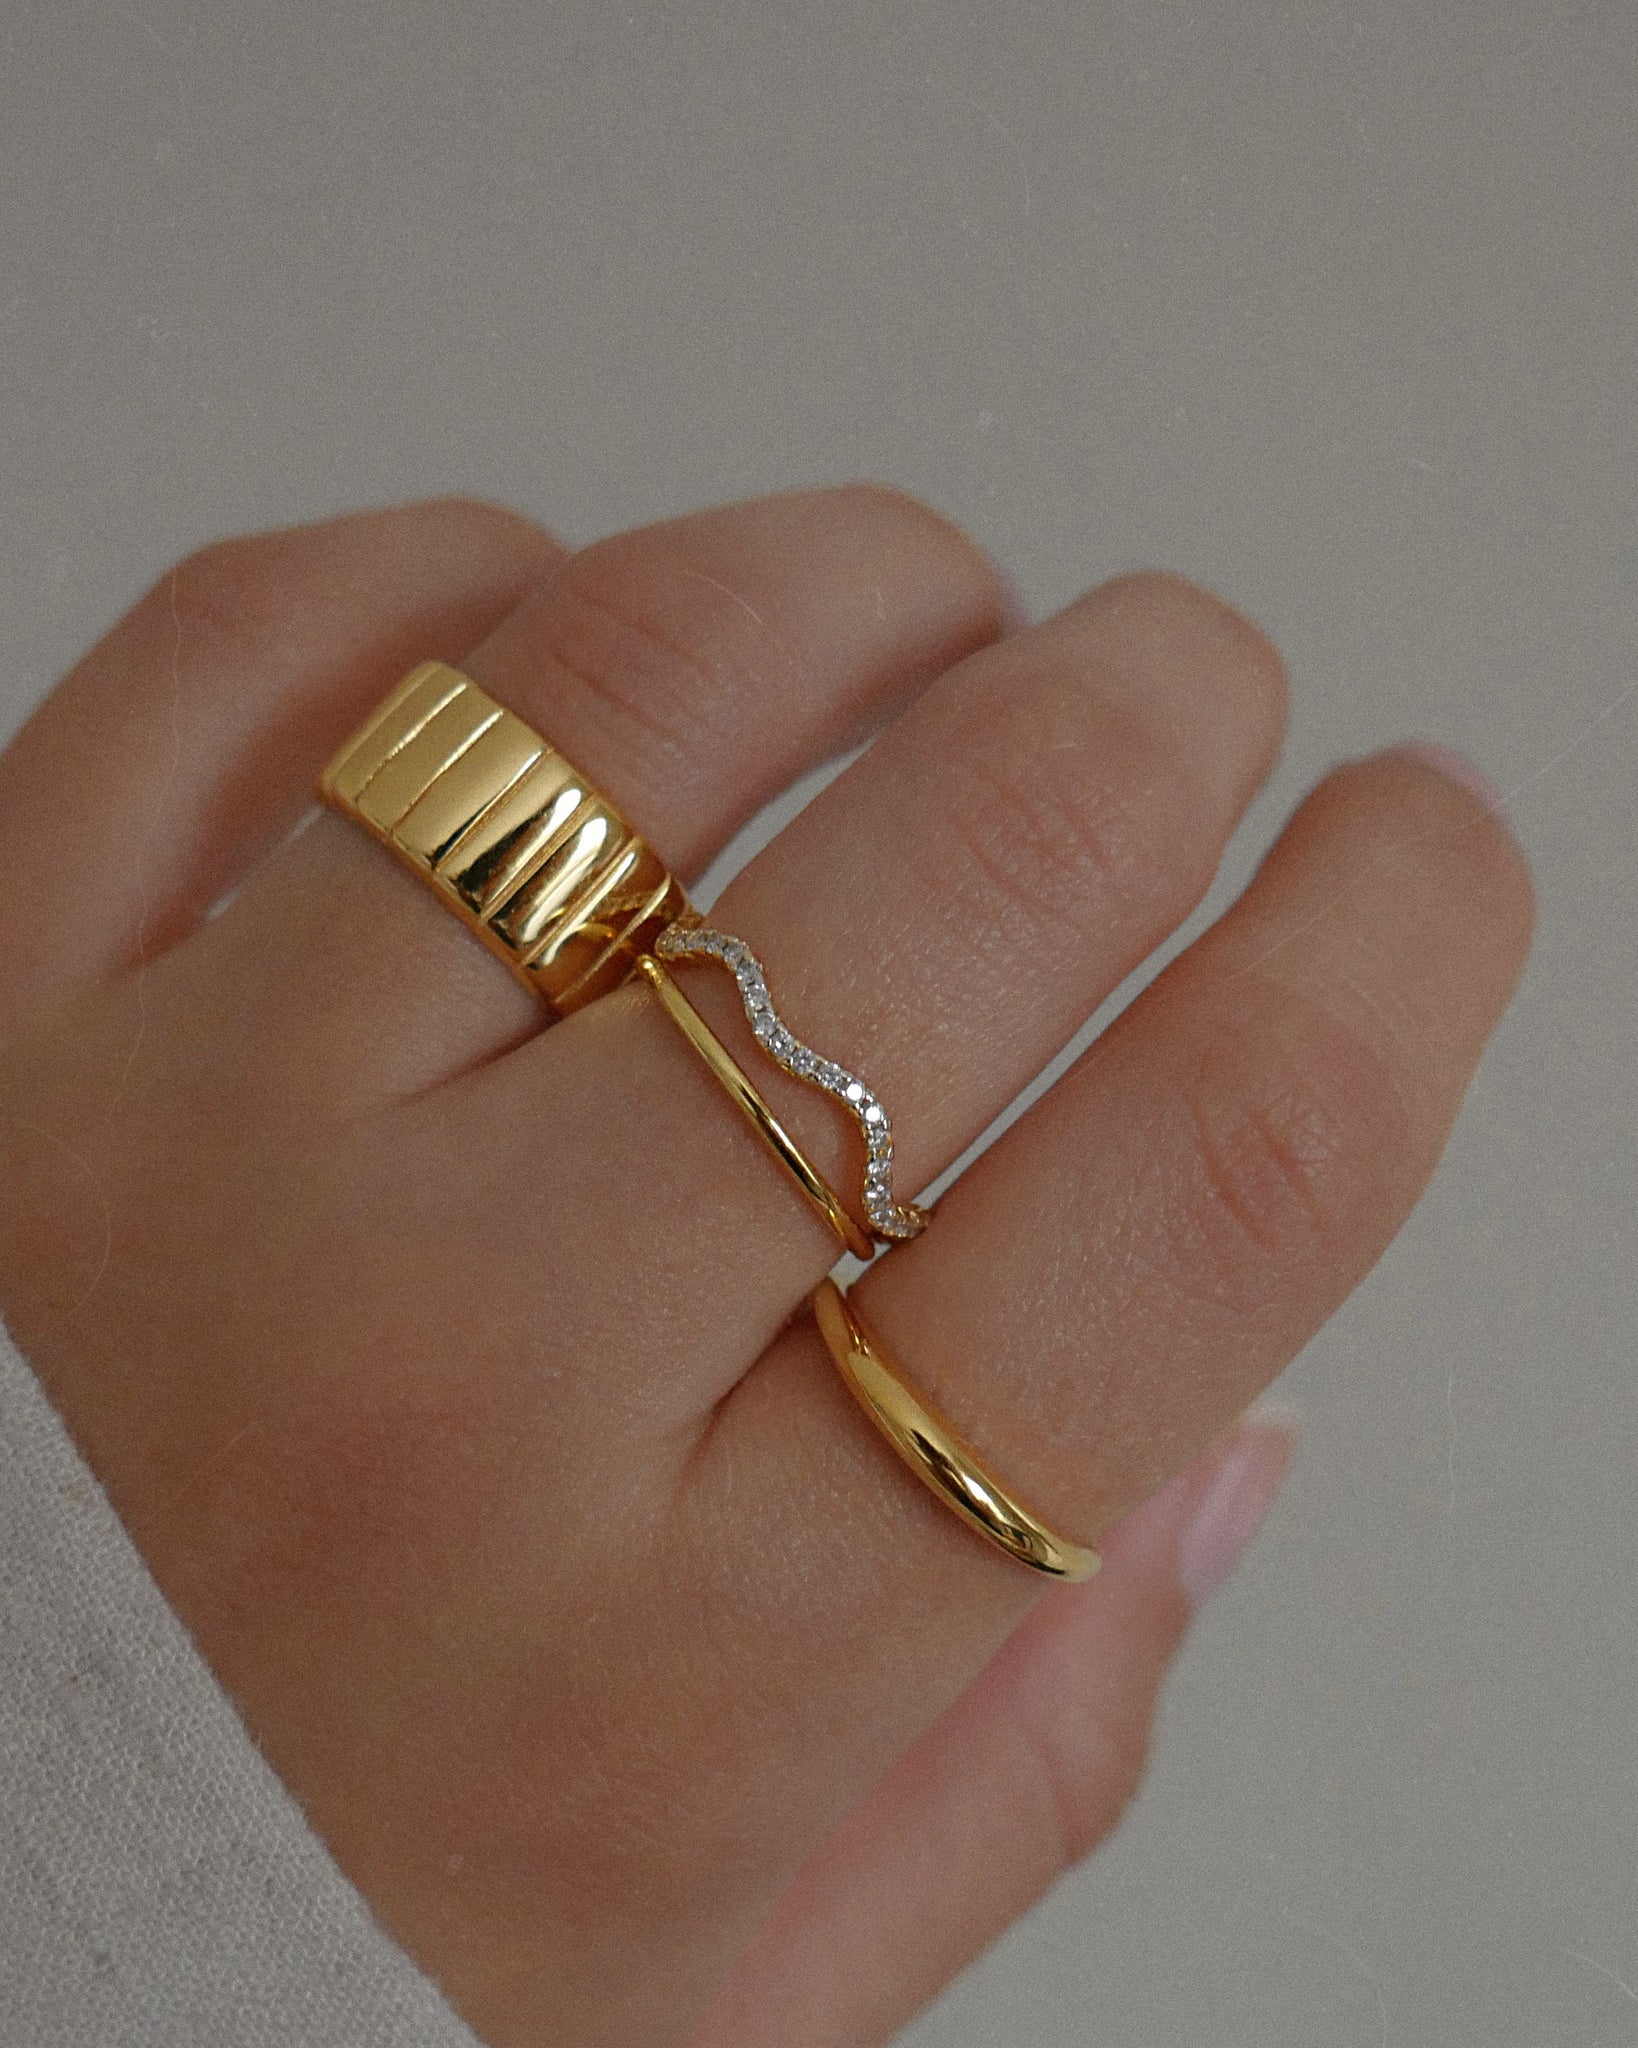 Buy Cool Thumb Ring Online In India - Etsy India